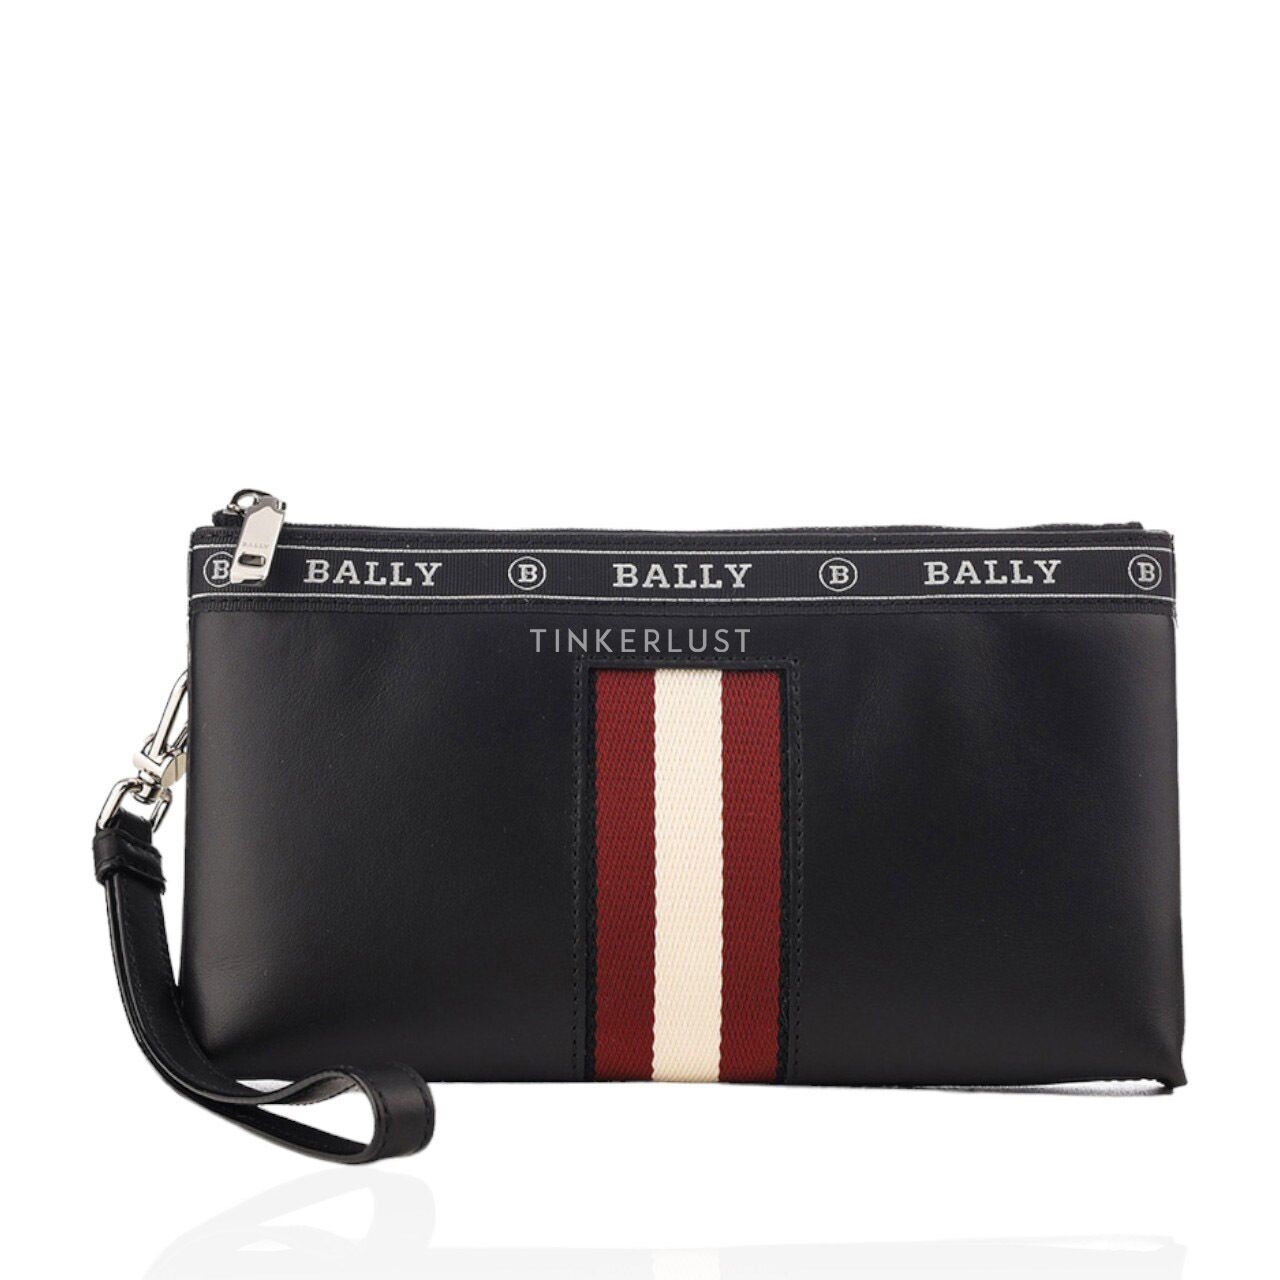 Bally Beryer Phone Wallet in Black Bovine Leather with Red/White Stripe Pouch